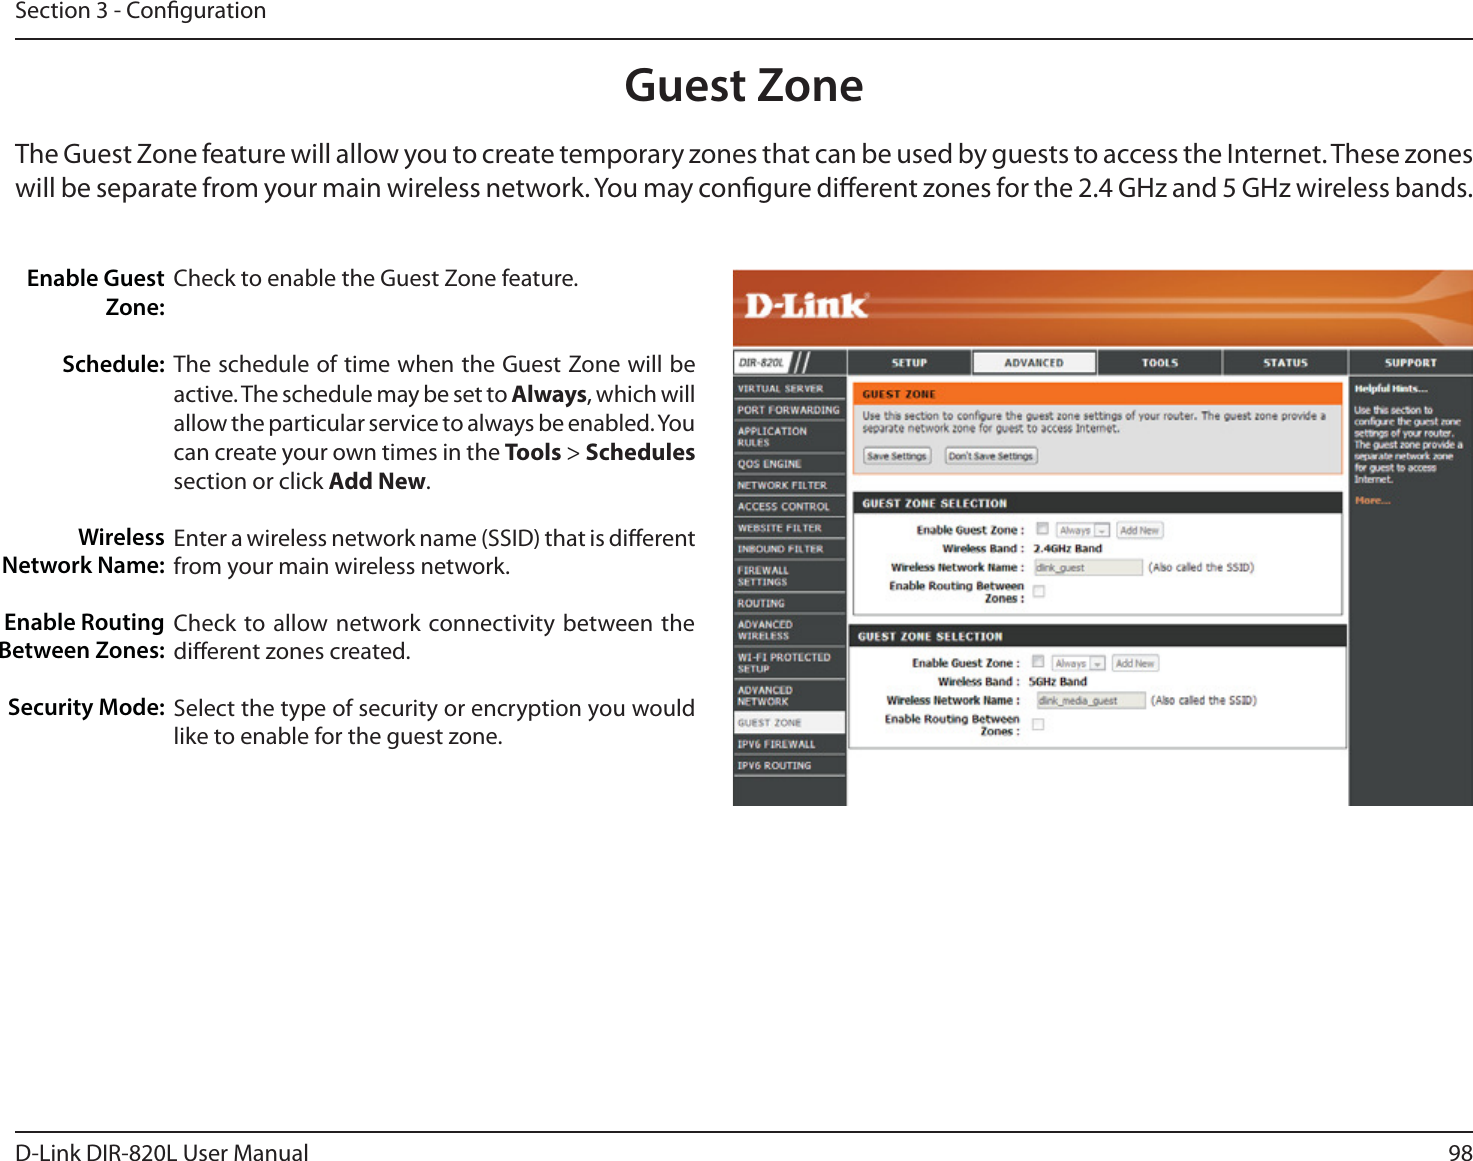 98D-Link DIR-820L User ManualSection 3 - CongurationGuest ZoneCheck to enable the Guest Zone feature. The schedule of time when the Guest Zone will be active. The schedule may be set to Always, which will allow the particular service to always be enabled. You can create your own times in the Tools &gt; Schedules section or click Add New.Enter a wireless network name (SSID) that is dierent from your main wireless network.Check to allow network connectivity between the dierent zones created. Select the type of security or encryption you would like to enable for the guest zone.  Enable Guest Zone:Schedule:Wireless Network Name:Enable Routing Between Zones:Security Mode:The Guest Zone feature will allow you to create temporary zones that can be used by guests to access the Internet. These zones will be separate from your main wireless network. You may congure dierent zones for the 2.4 GHz and 5 GHz wireless bands.